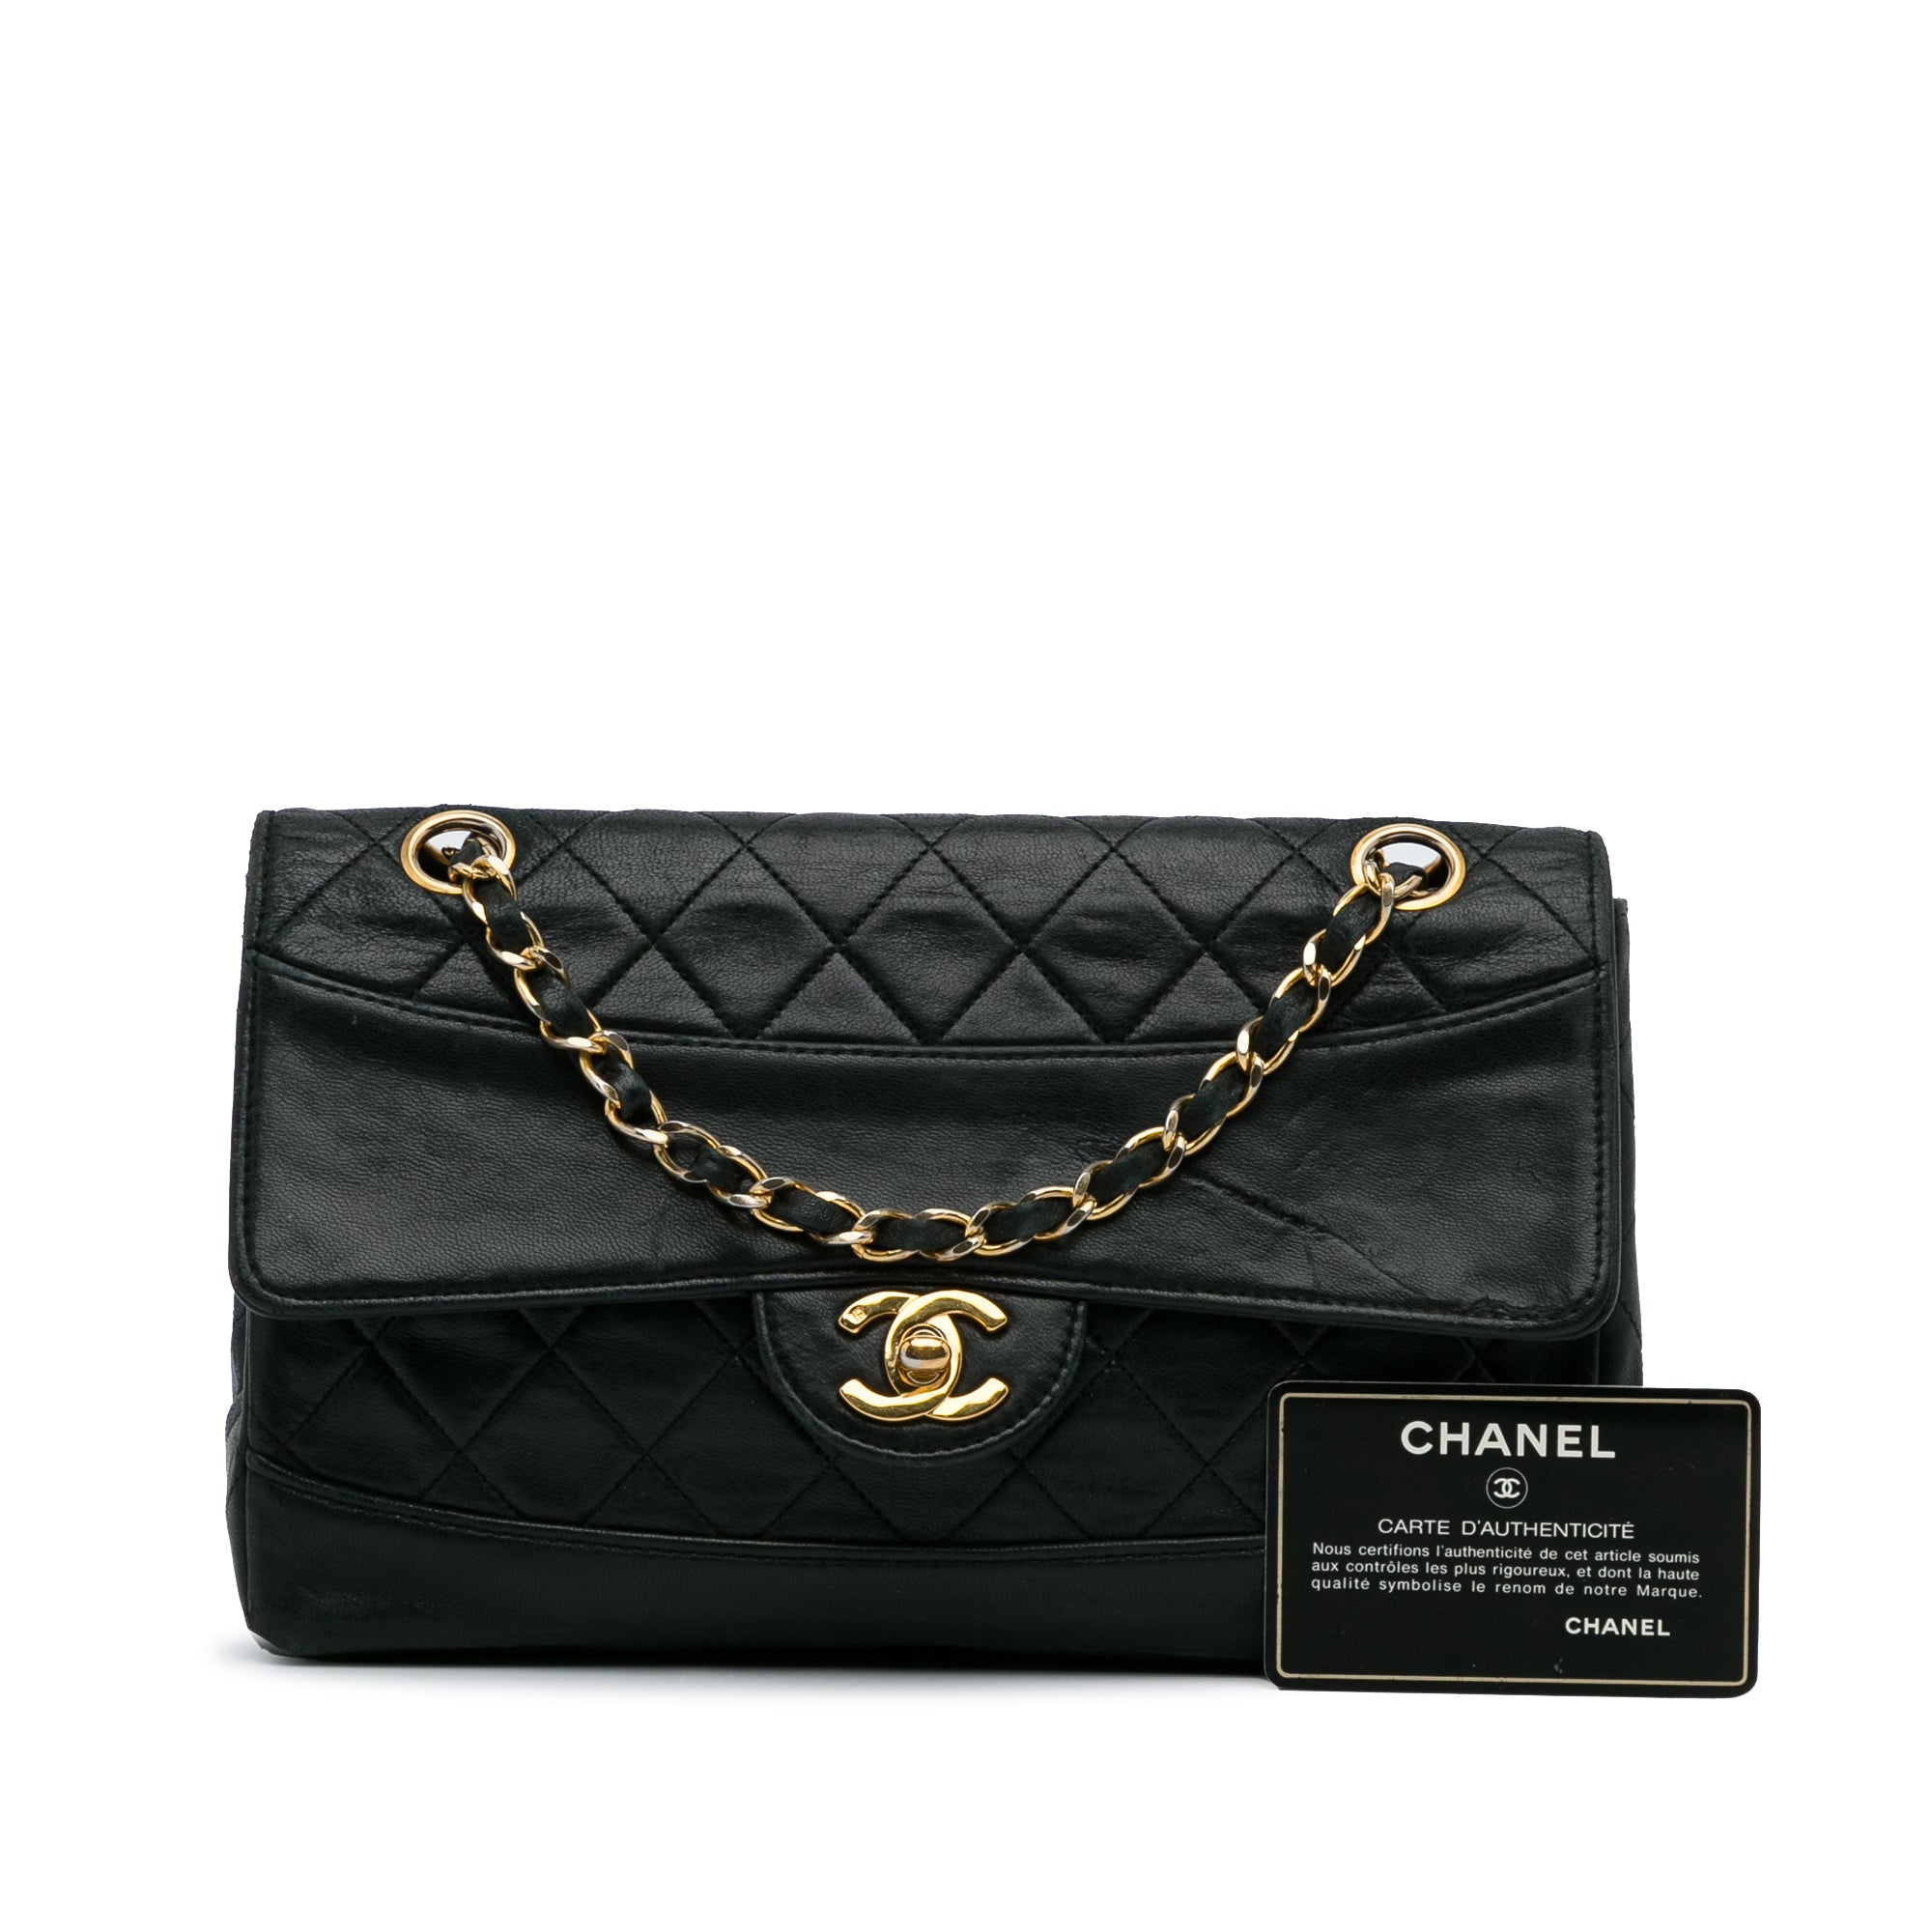 Chanel Black Quilted Lambskin Leather Cover CC Shoulder Bag